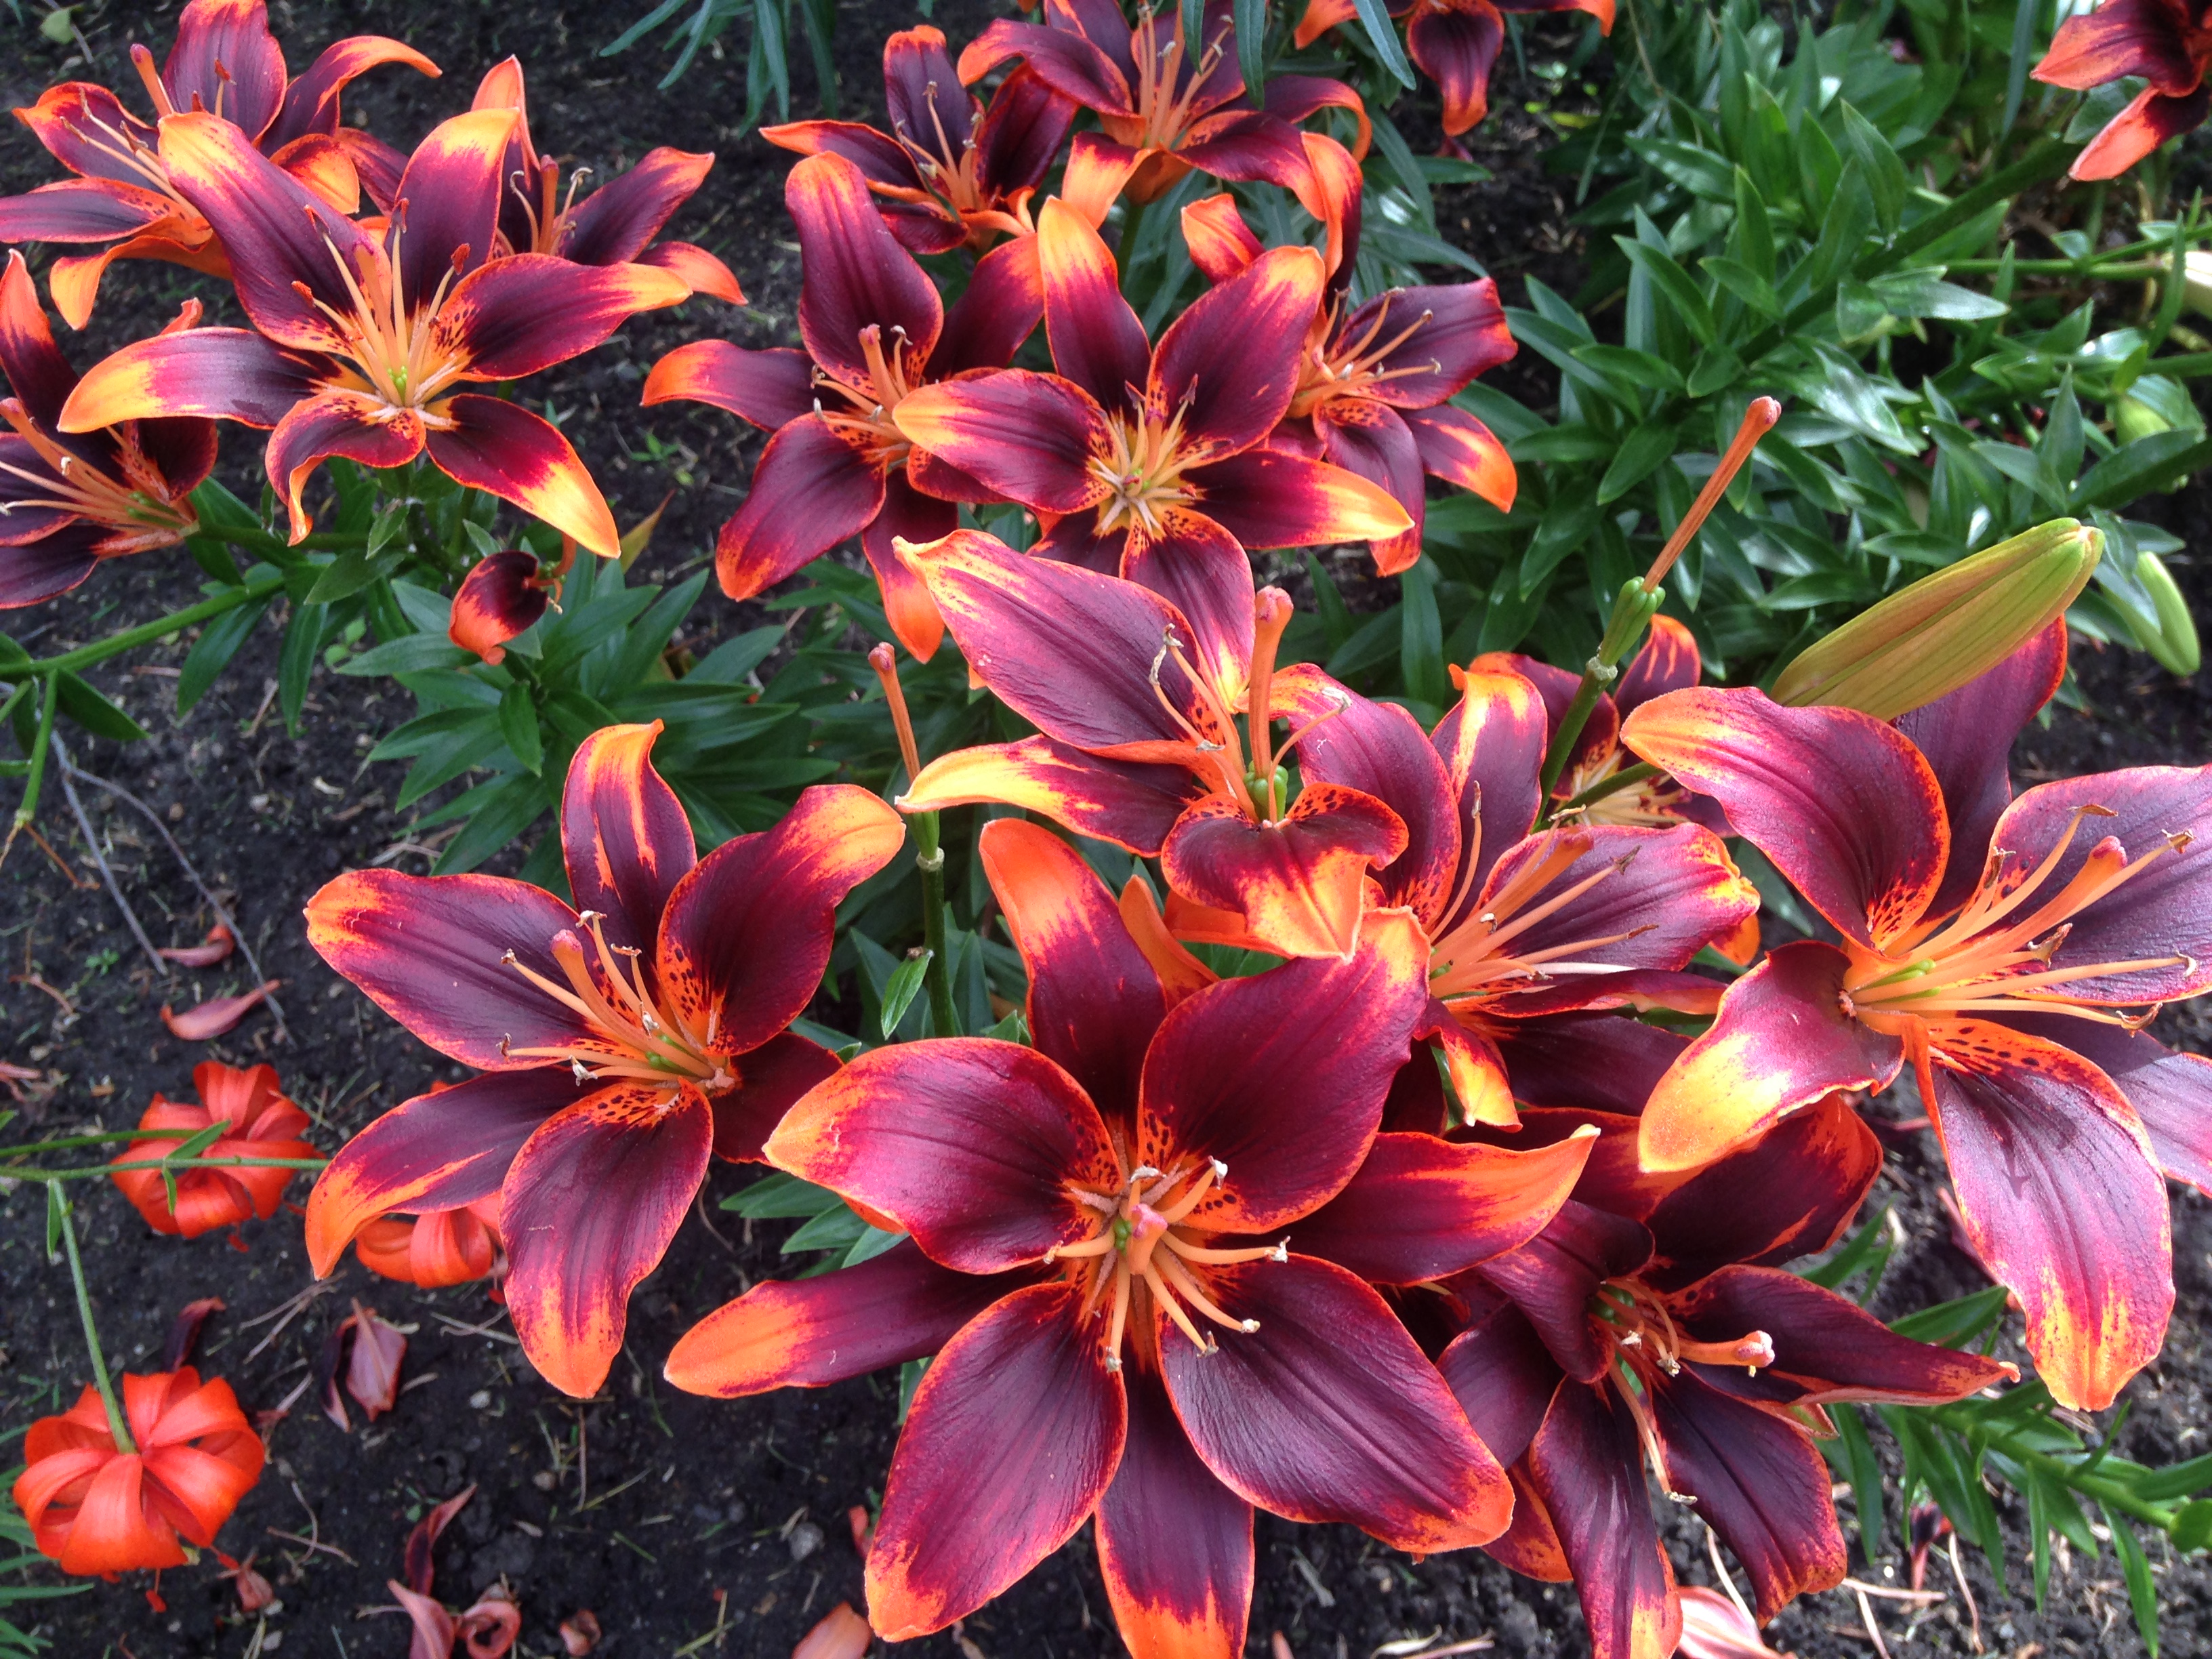 Orange and brown lilies in an outdoor garden on the grounds of Government House SK